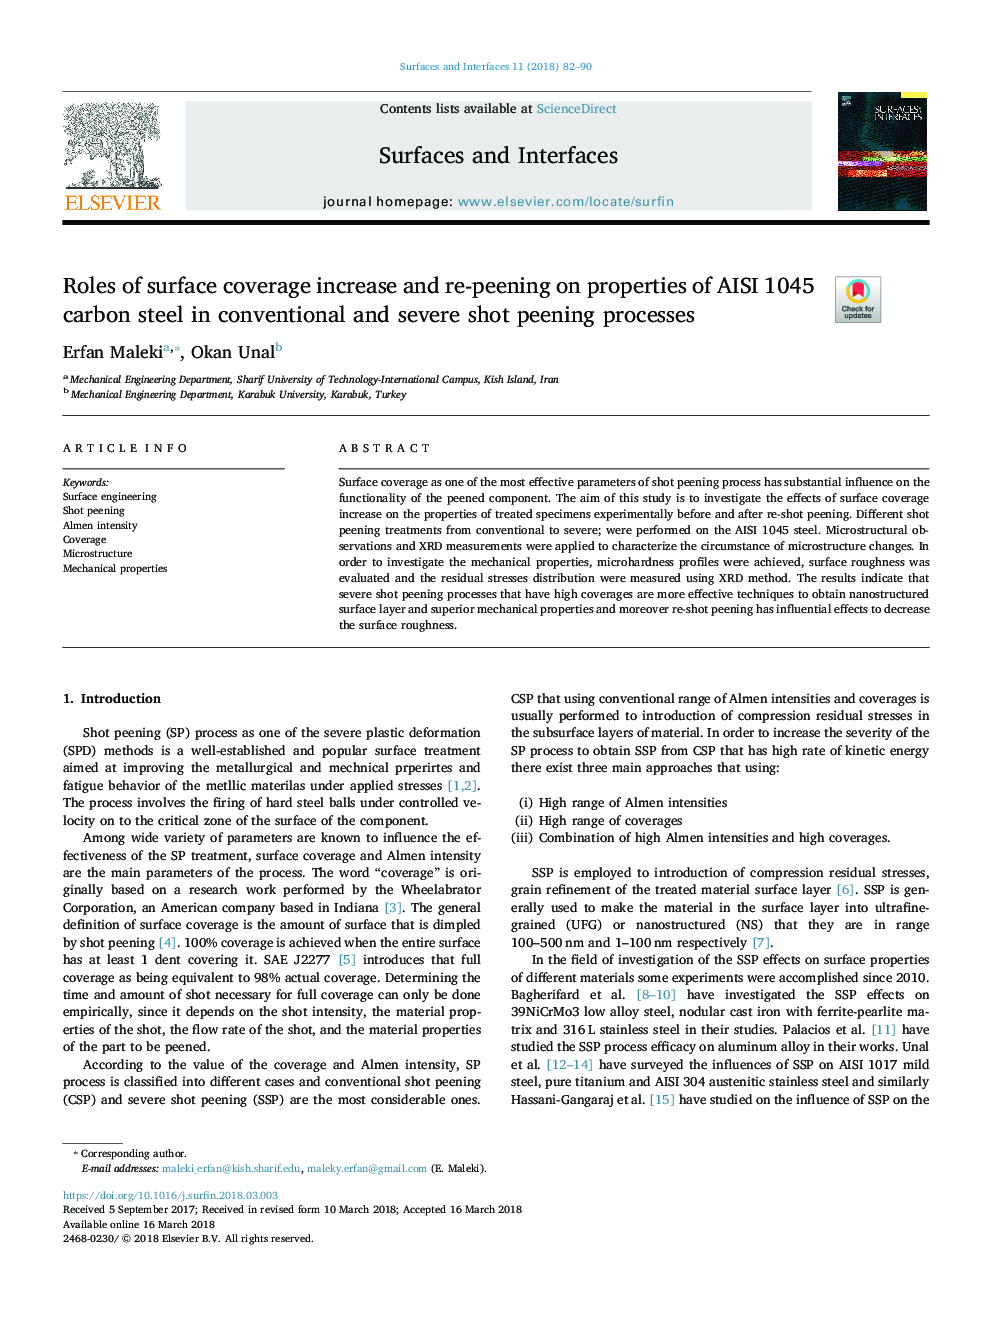 Roles of surface coverage increase and re-peening on properties of AISI 1045 carbon steel in conventional and severe shot peening processes